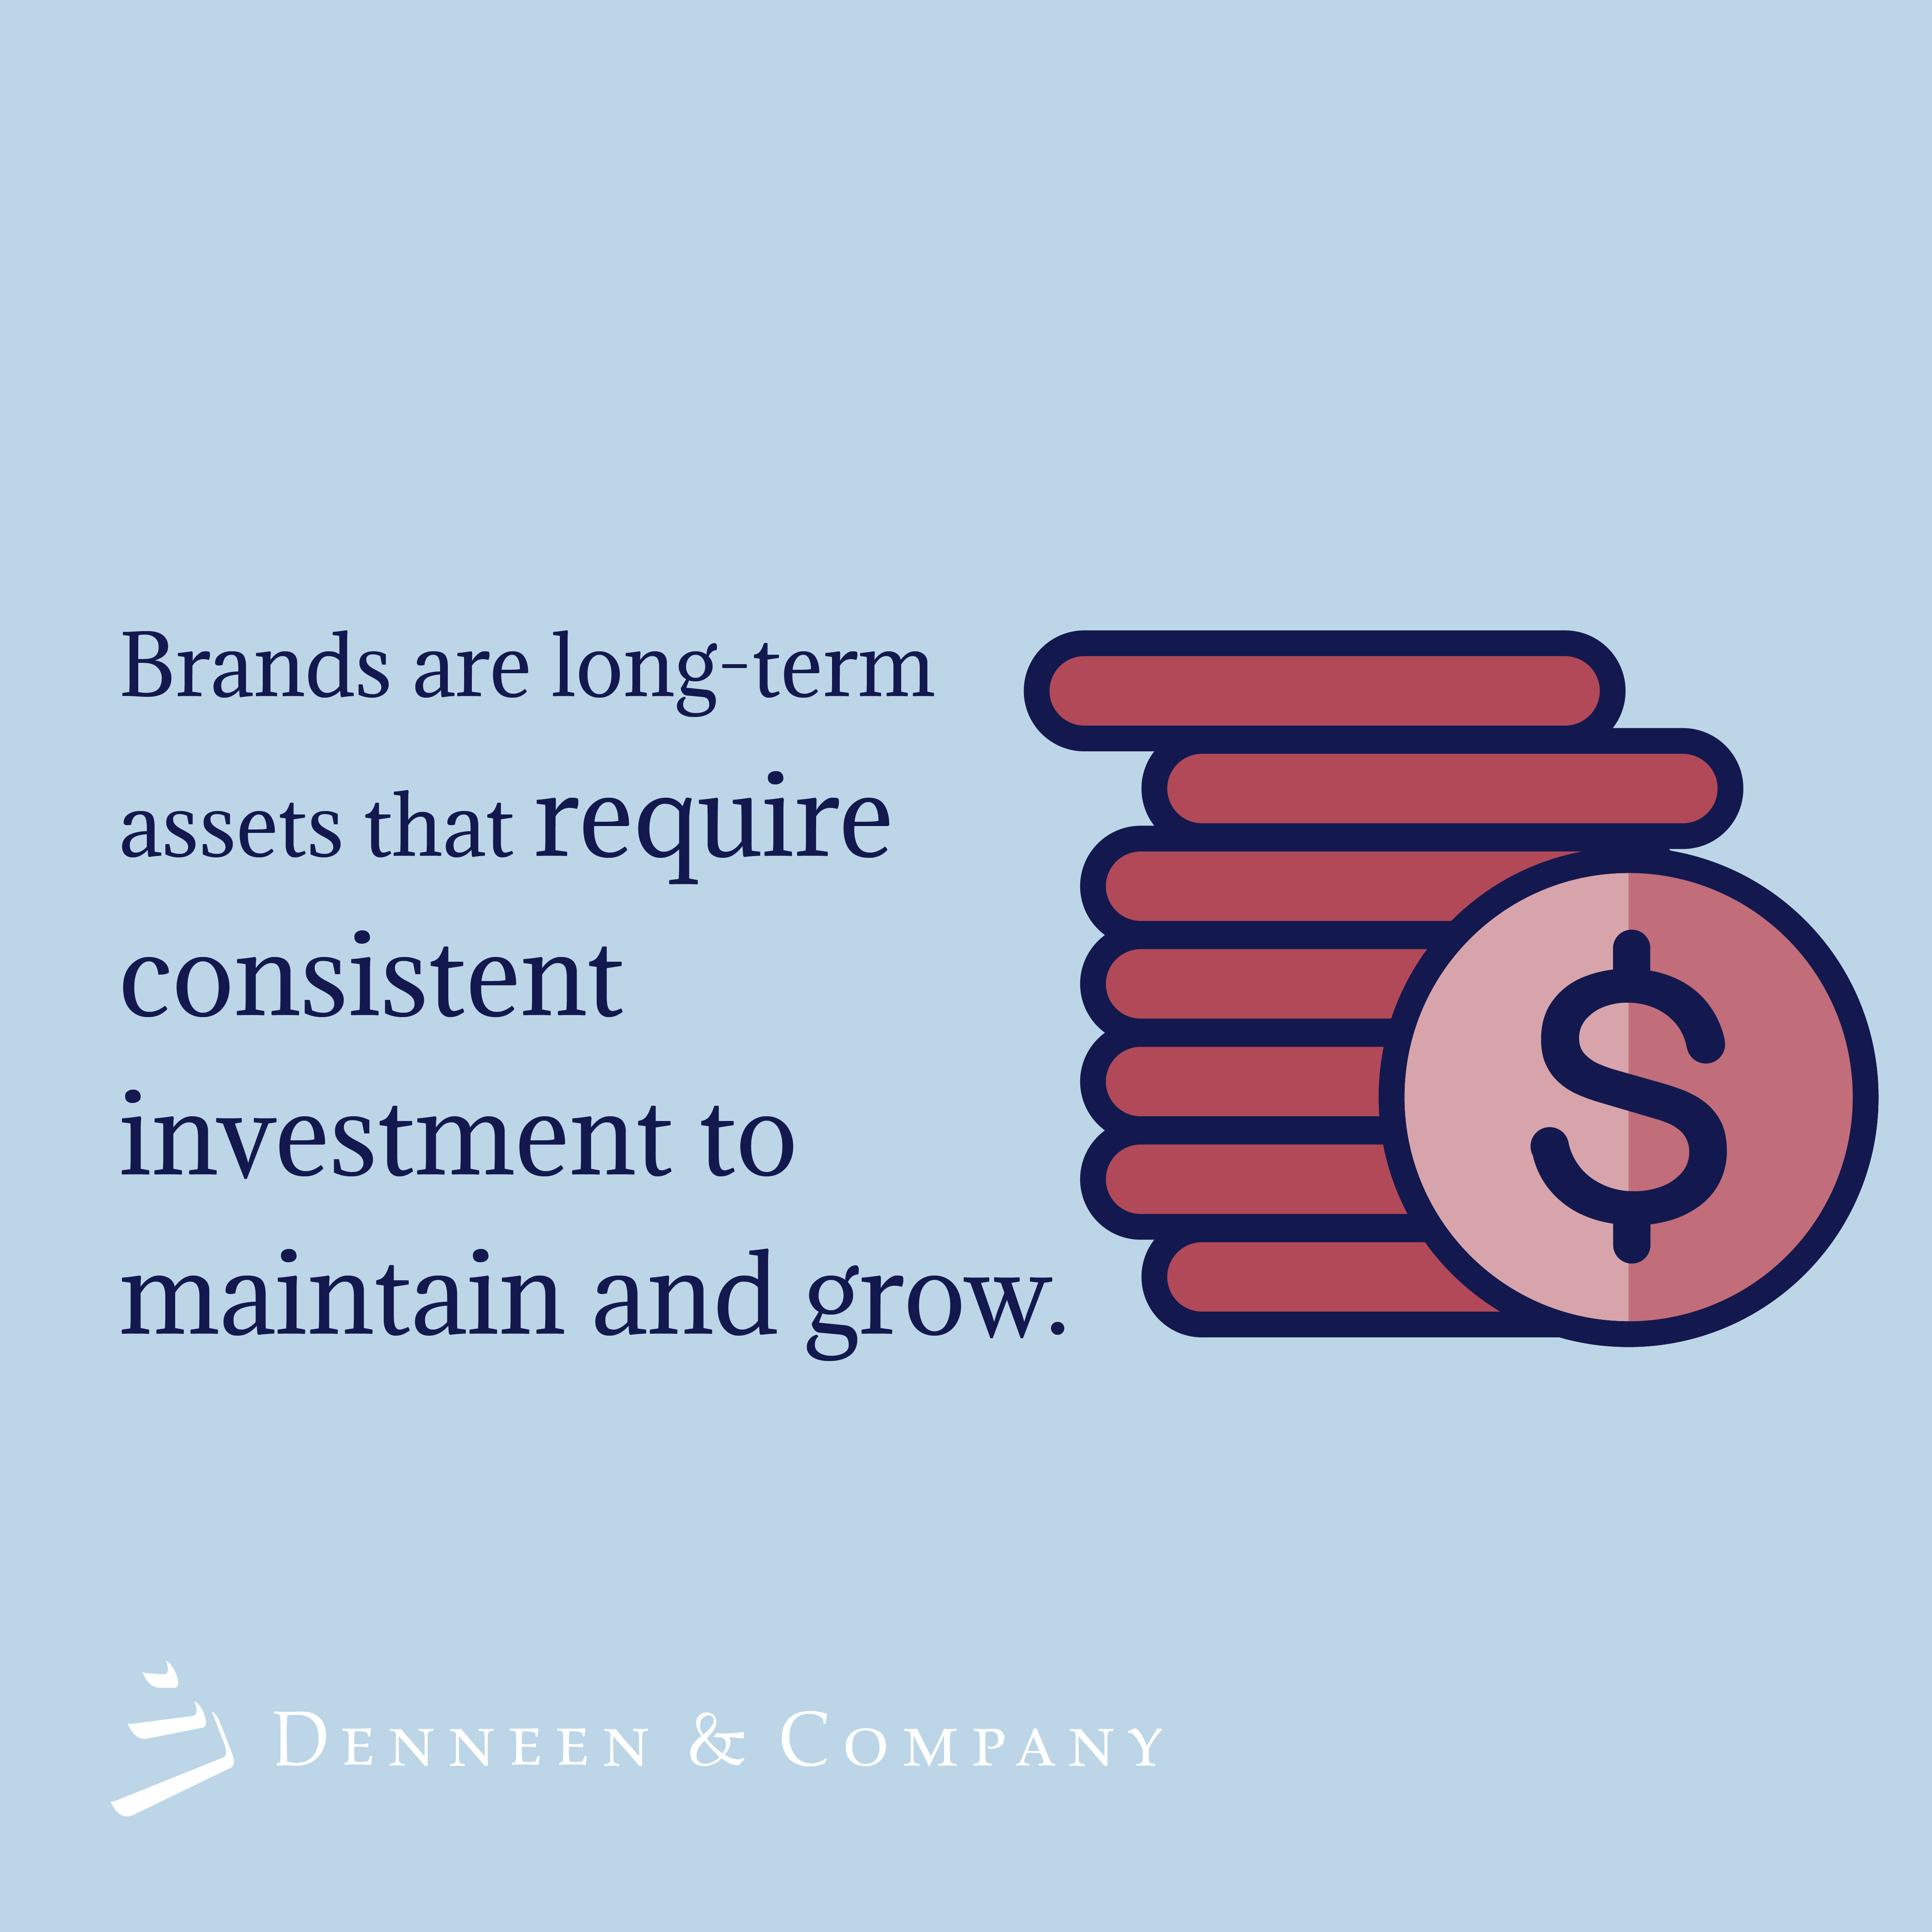 Brands are quantifiable assets, the value of which is built over time; neglecting and/or under-investing in brands will likely result in a devaluation of the brand, while consistent investment and brand-building efforts will increase brand value and resiliency